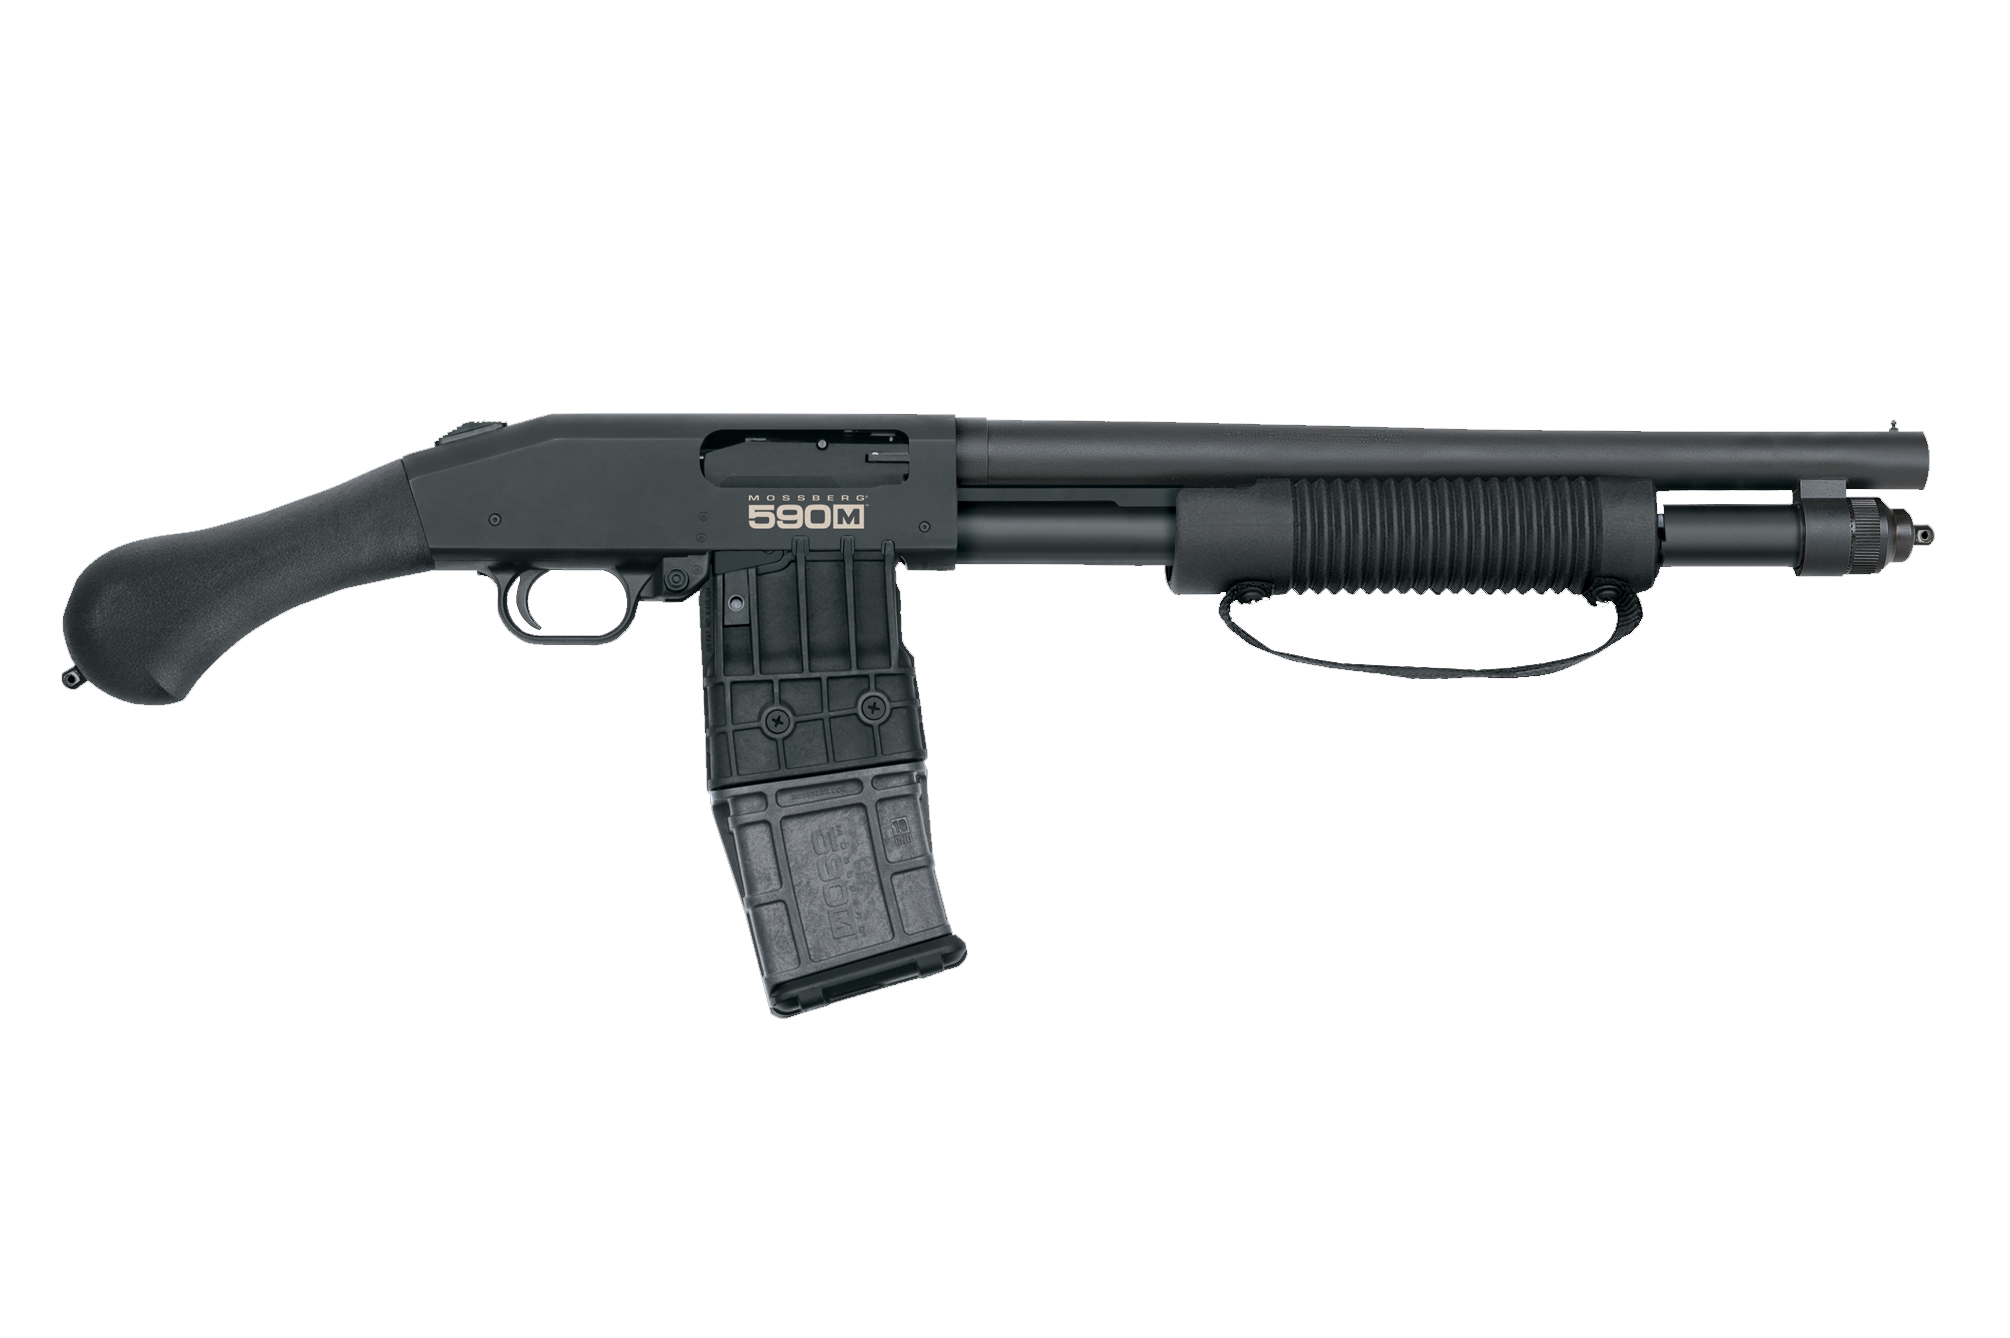 Read: Mossberg Introduces 12-Gauge Magazine Fed Shockwave from Patrick Robe...